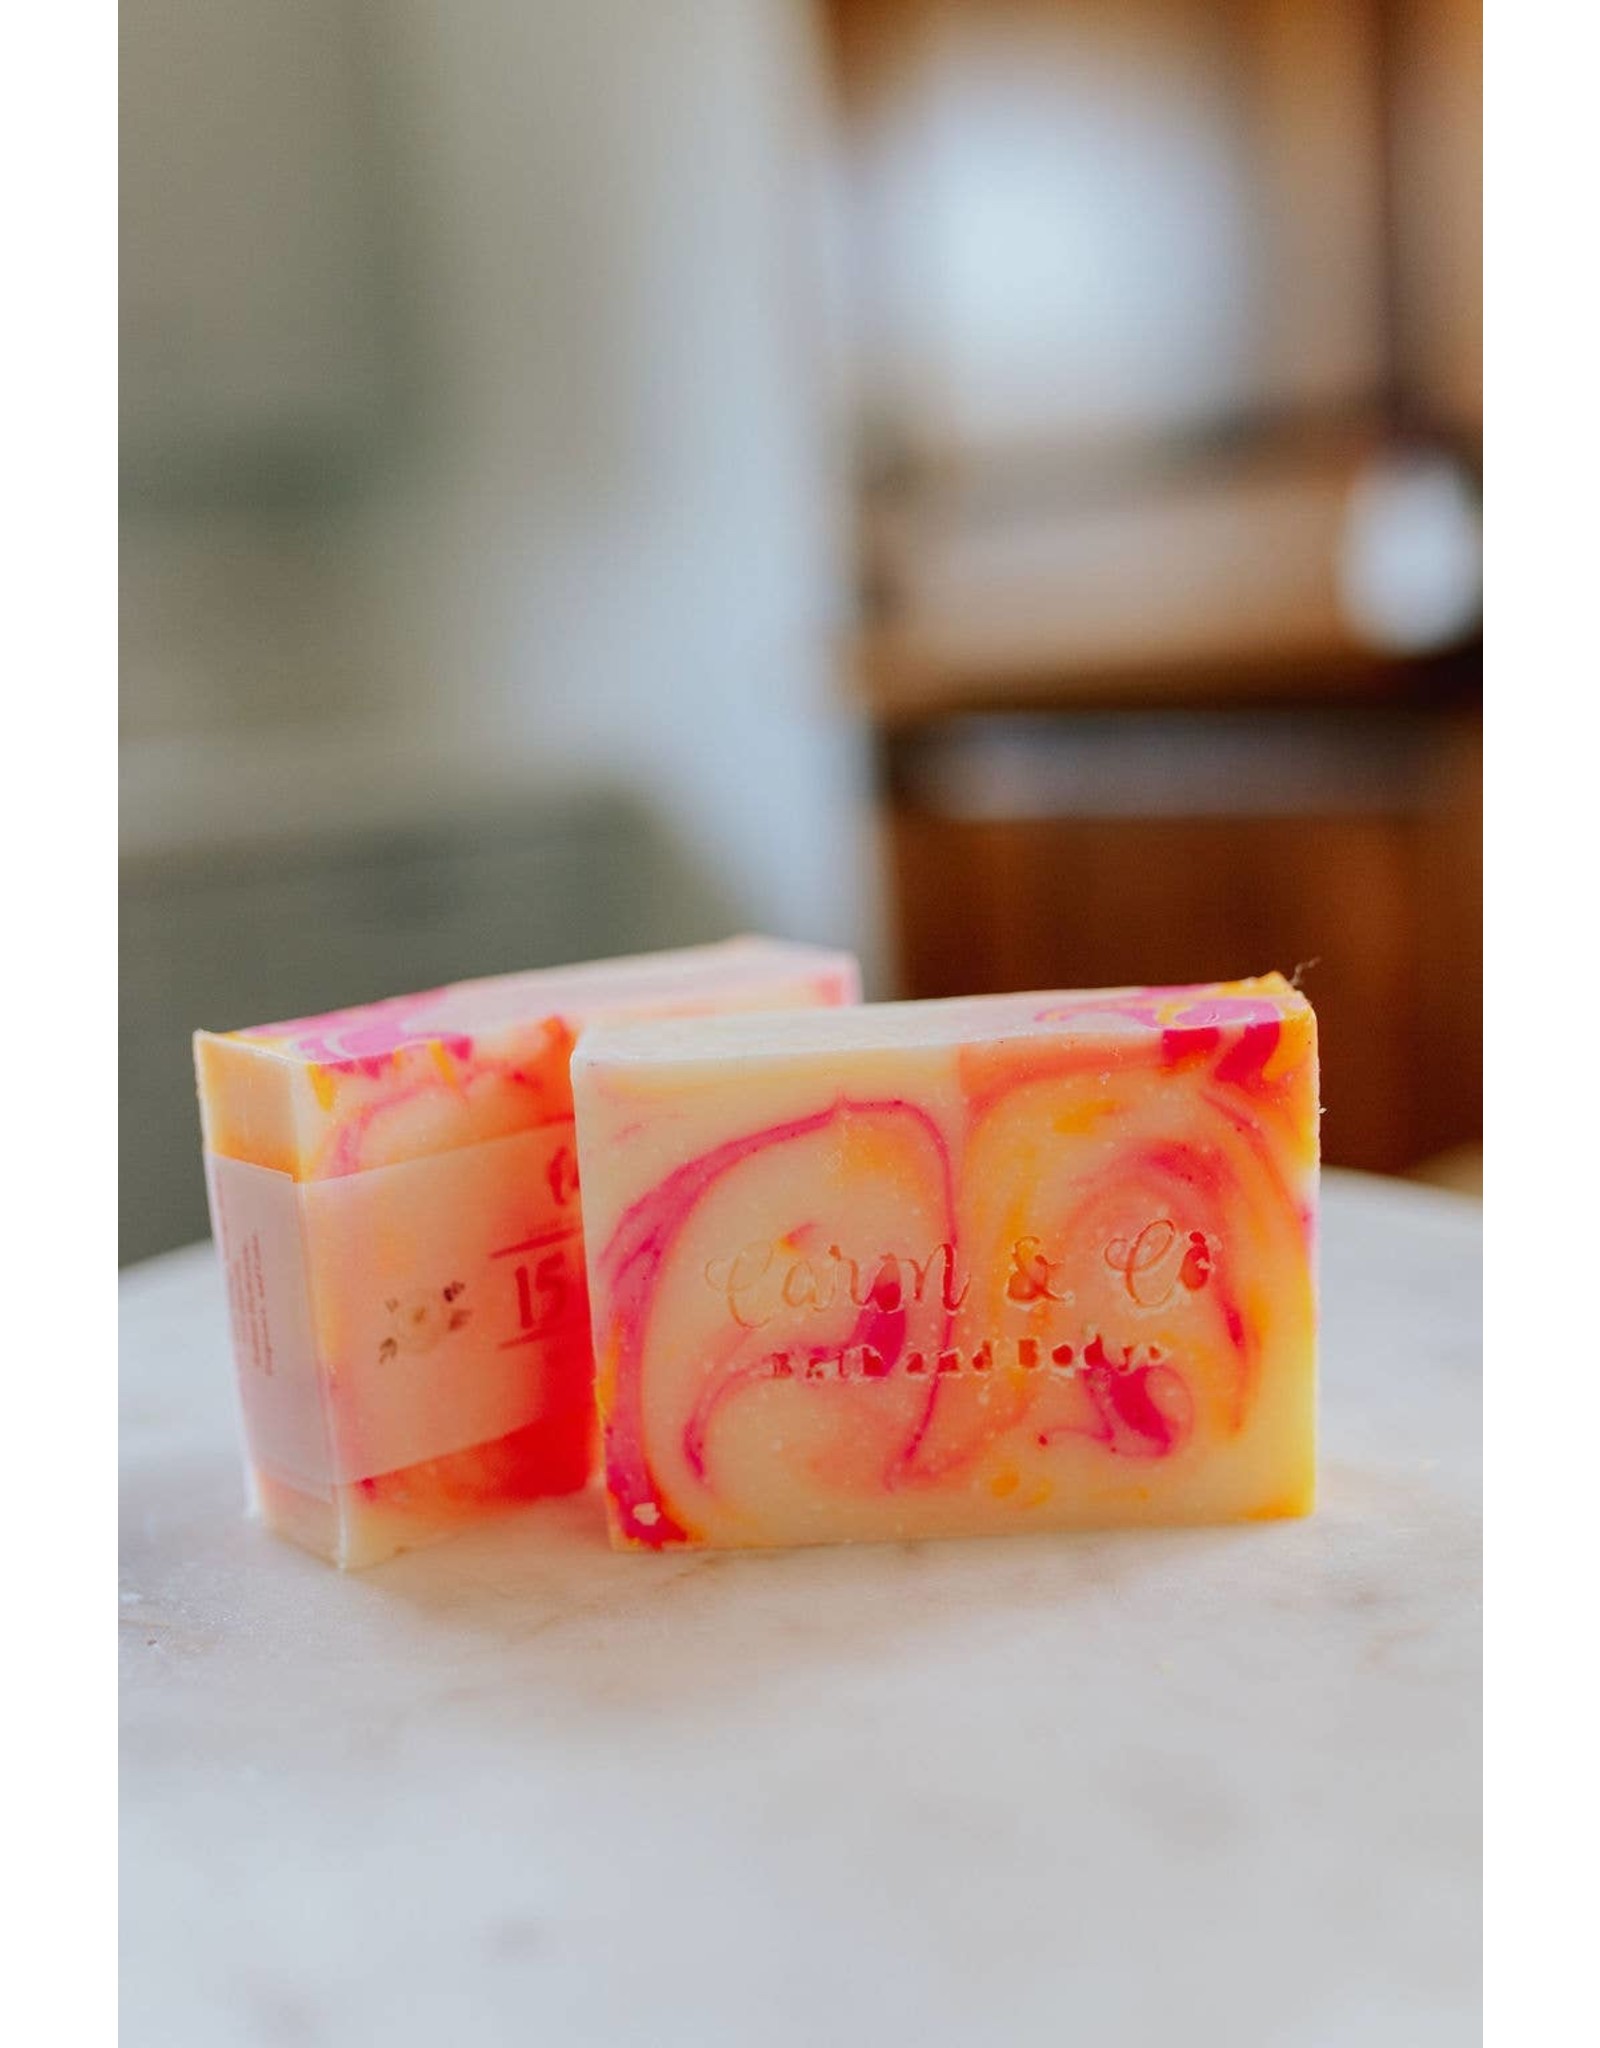 Caren & Co Bath and Body With Love Soap - Slice